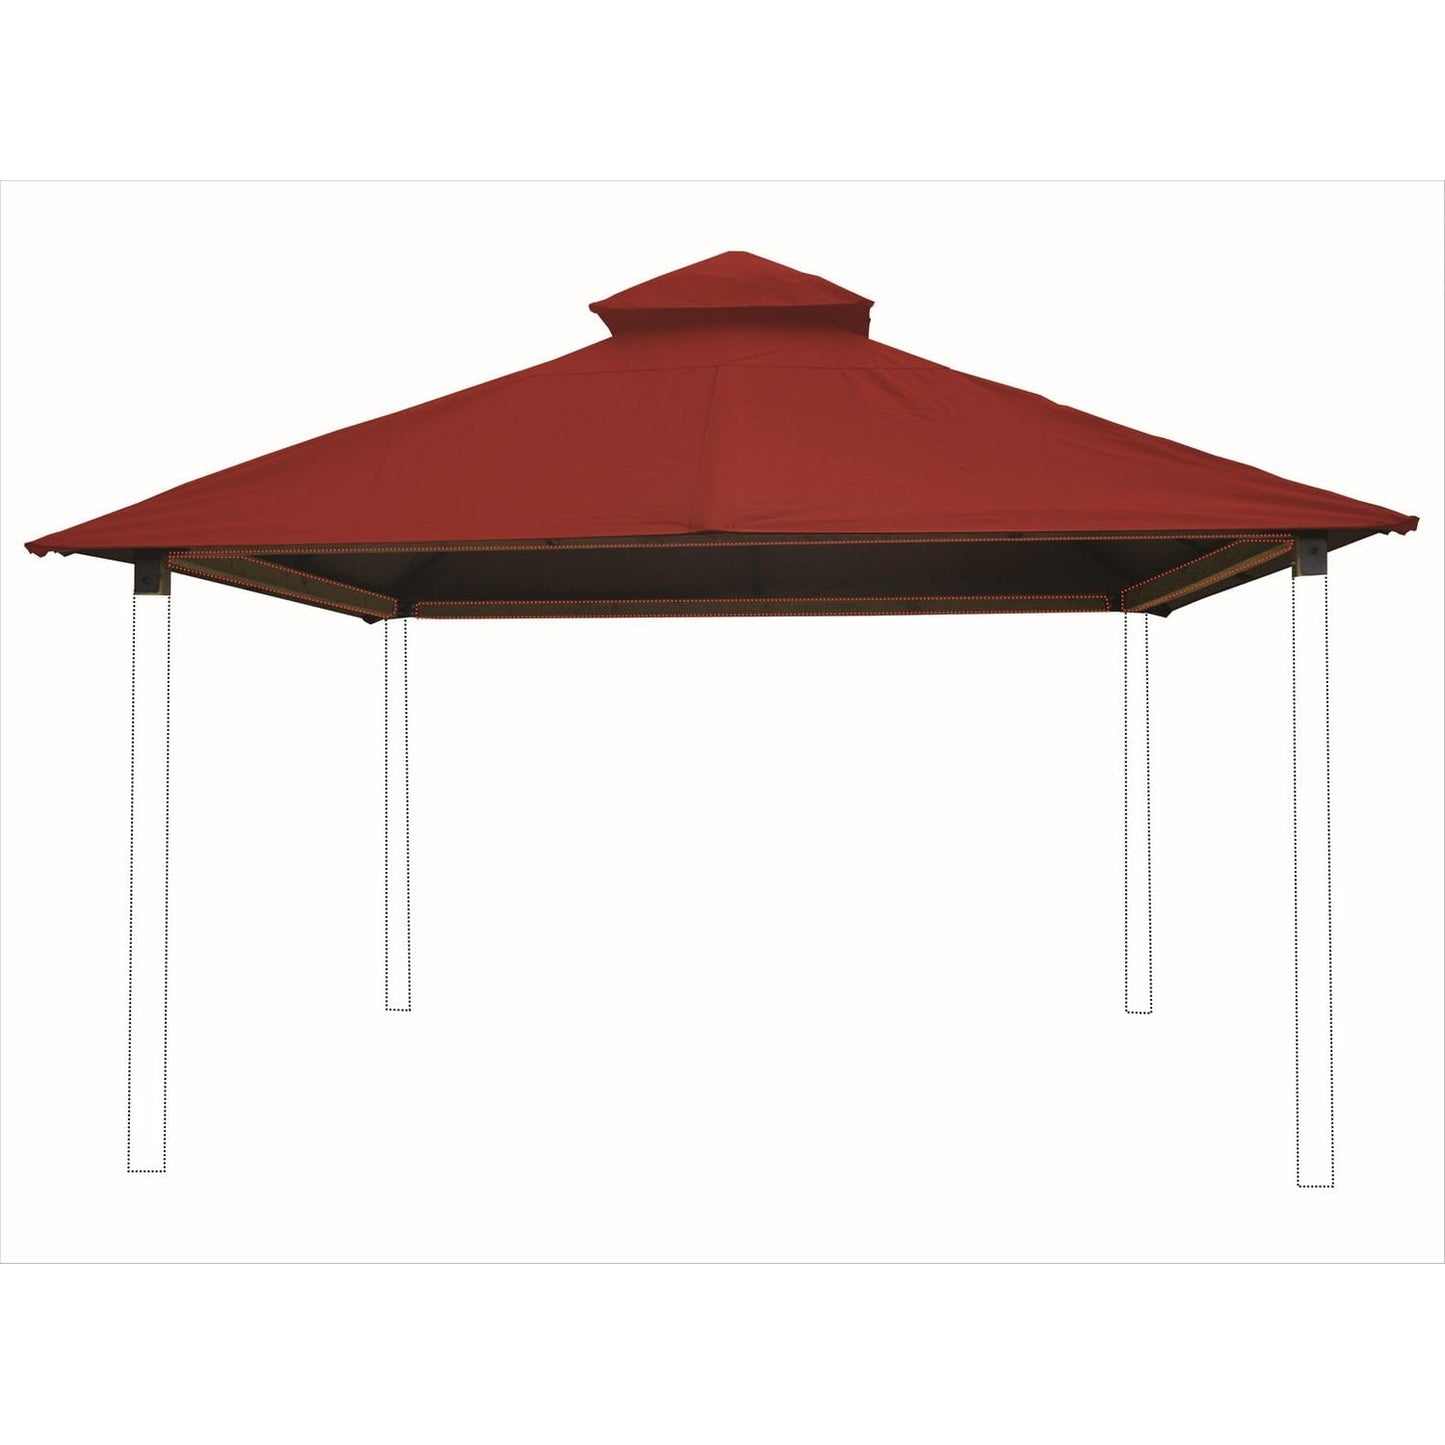 Riverstone Industries Soft Top Gazebos 12FT X 12FT Riverstone | ACACIA Gazebo Roof Framing and Mounting Kit With OutDURA Canopy - China Red AGOK12-CHINA-RED